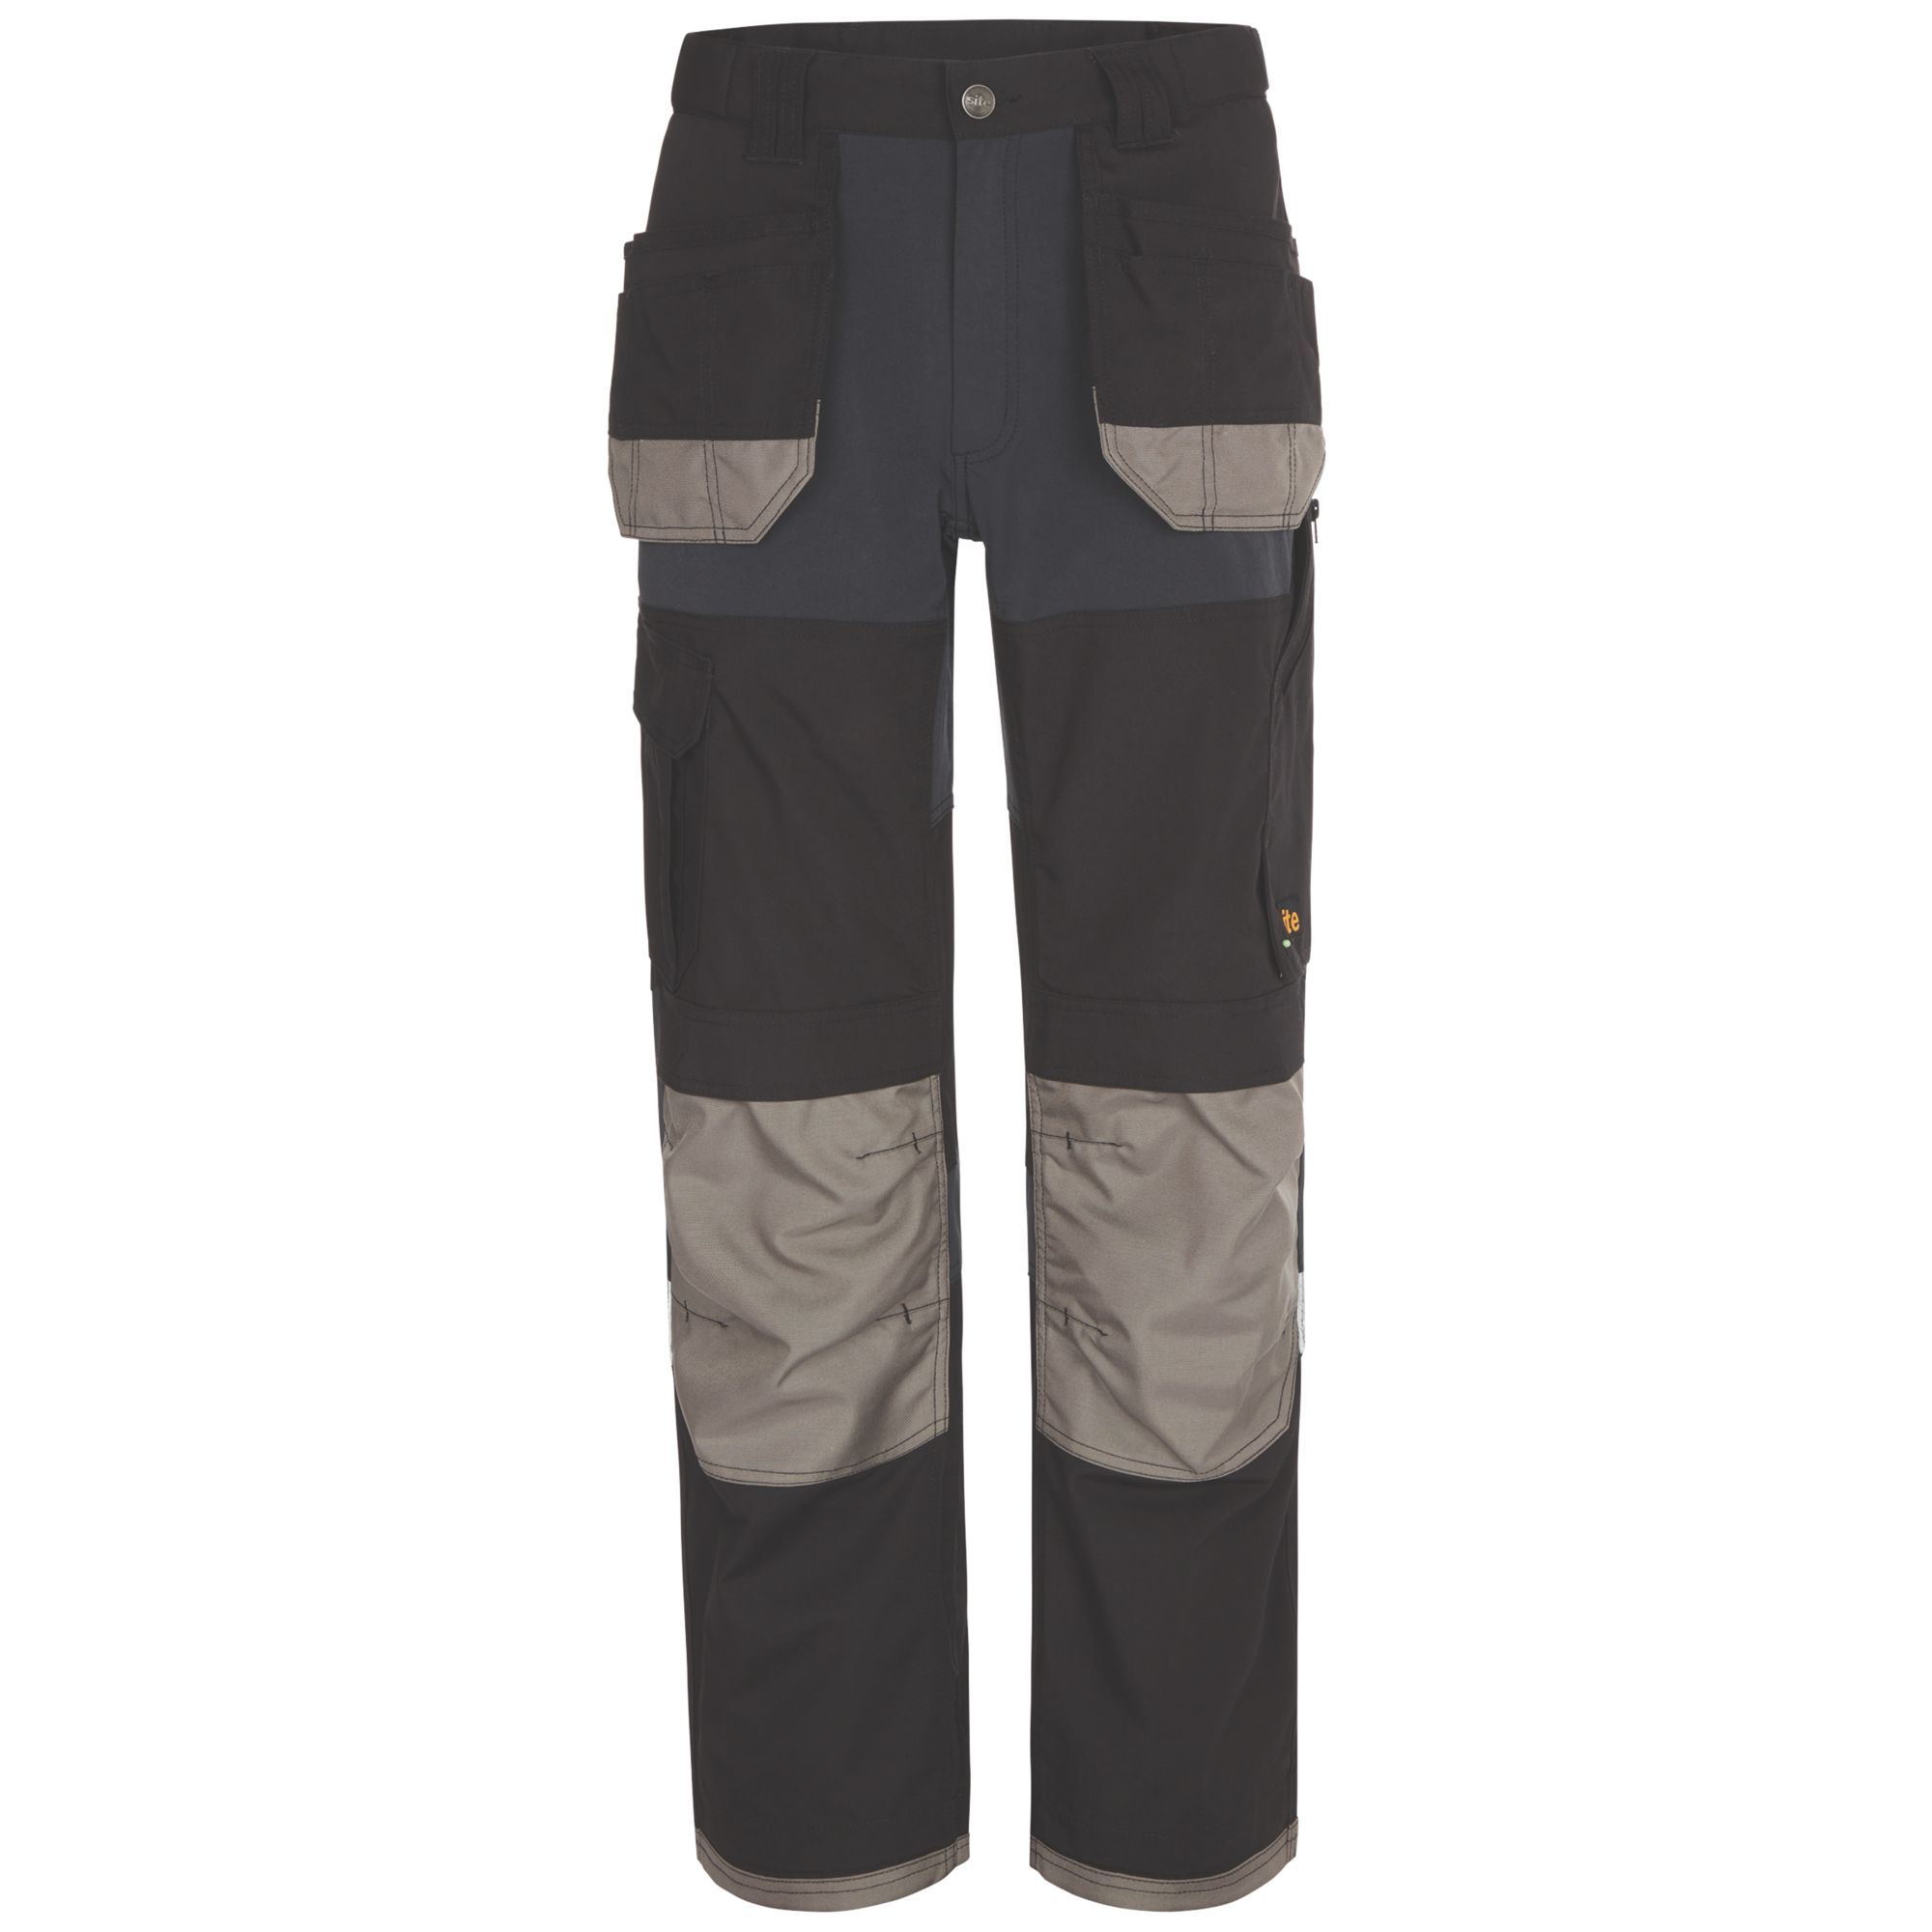 Site Chinook Black & Grey Men's Holster Pocket Trousers, W32" L32"